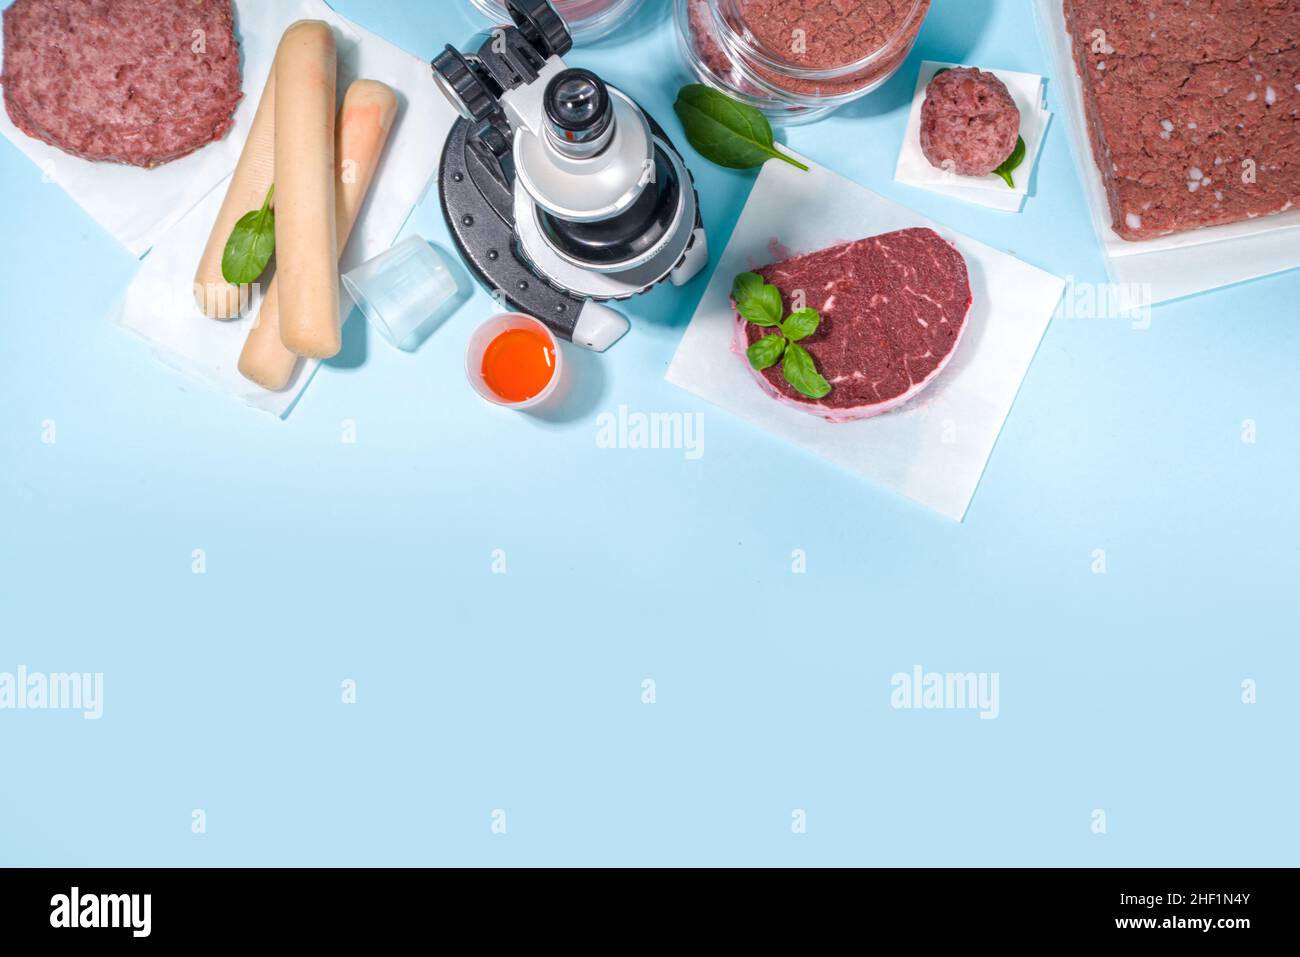 Lab grown meat alternatives concept, Various laboratory grown meat types red and white meat with microscope, laboratory accessories, measuring utensil Stock Photo